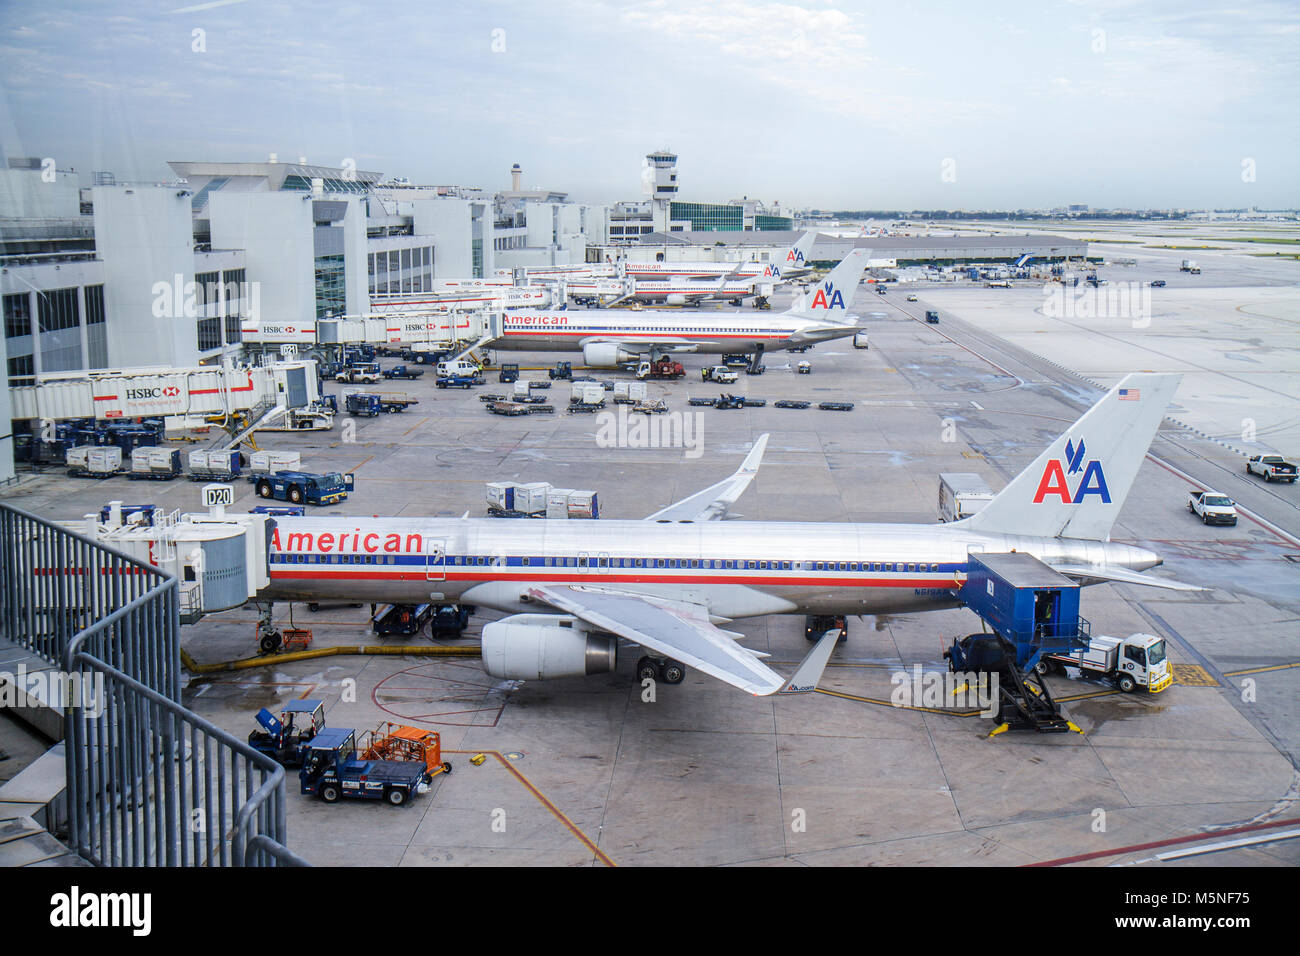 Miami Florida International Airport MIA,gate,tarmac,American Airlines,commercial airliner airplane plane aircraft aeroplane,visitors travel traveling Stock Photo